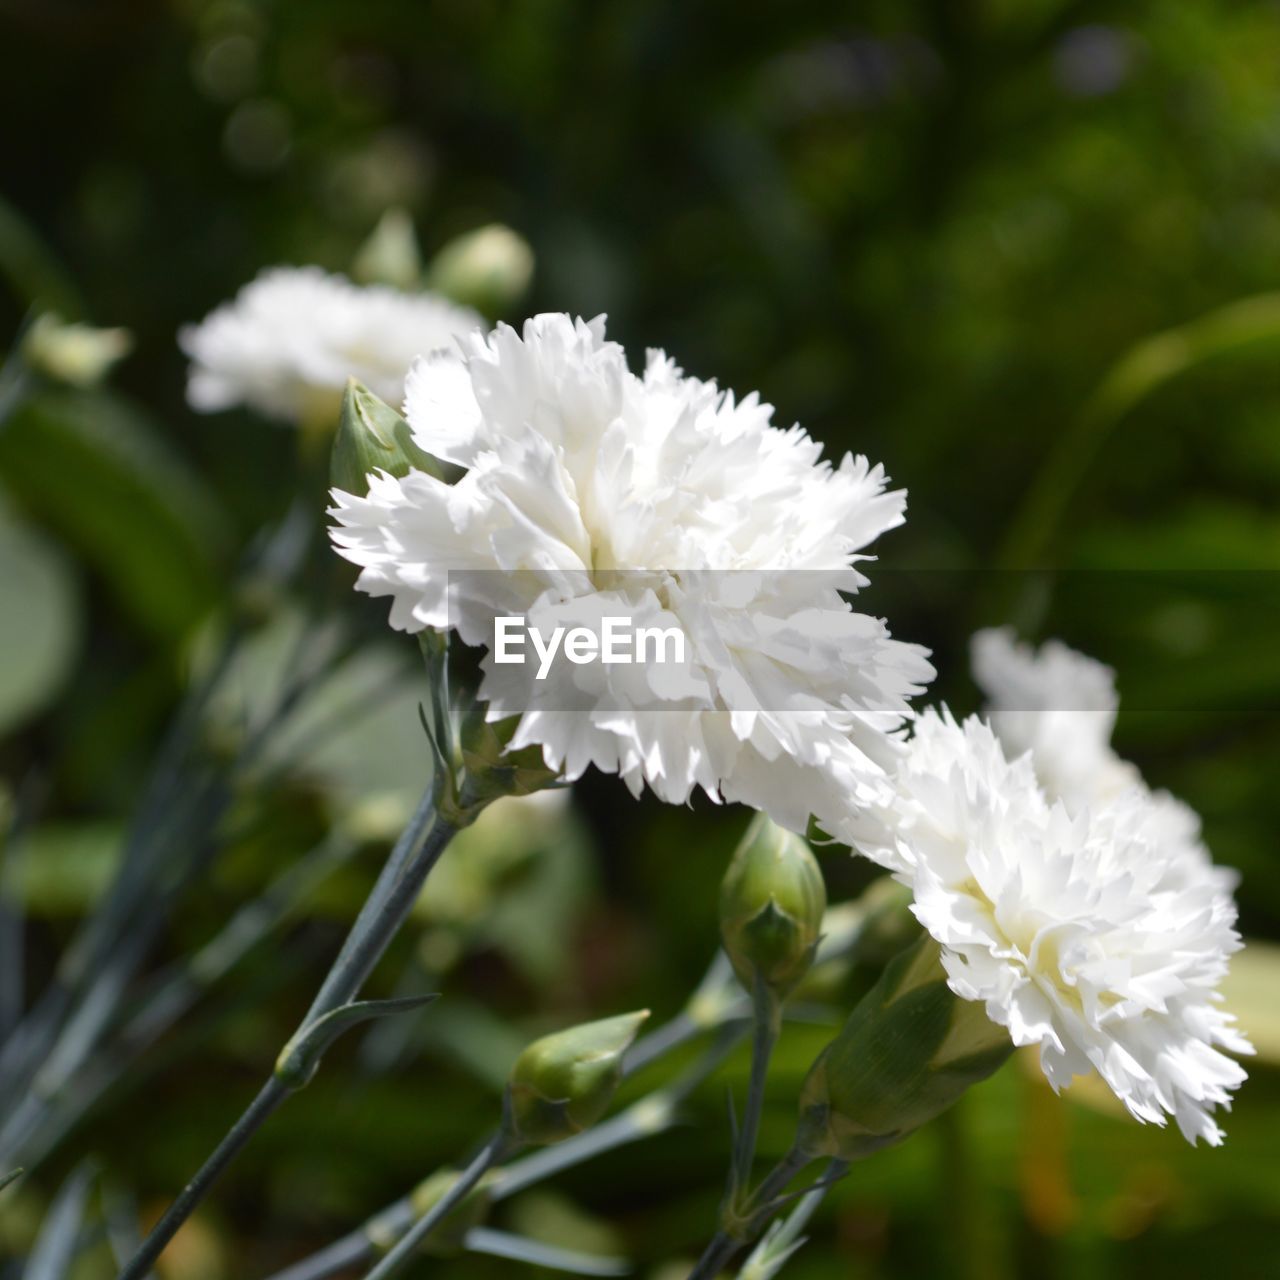 CLOSE-UP OF WHITE FLOWER ON PLANT